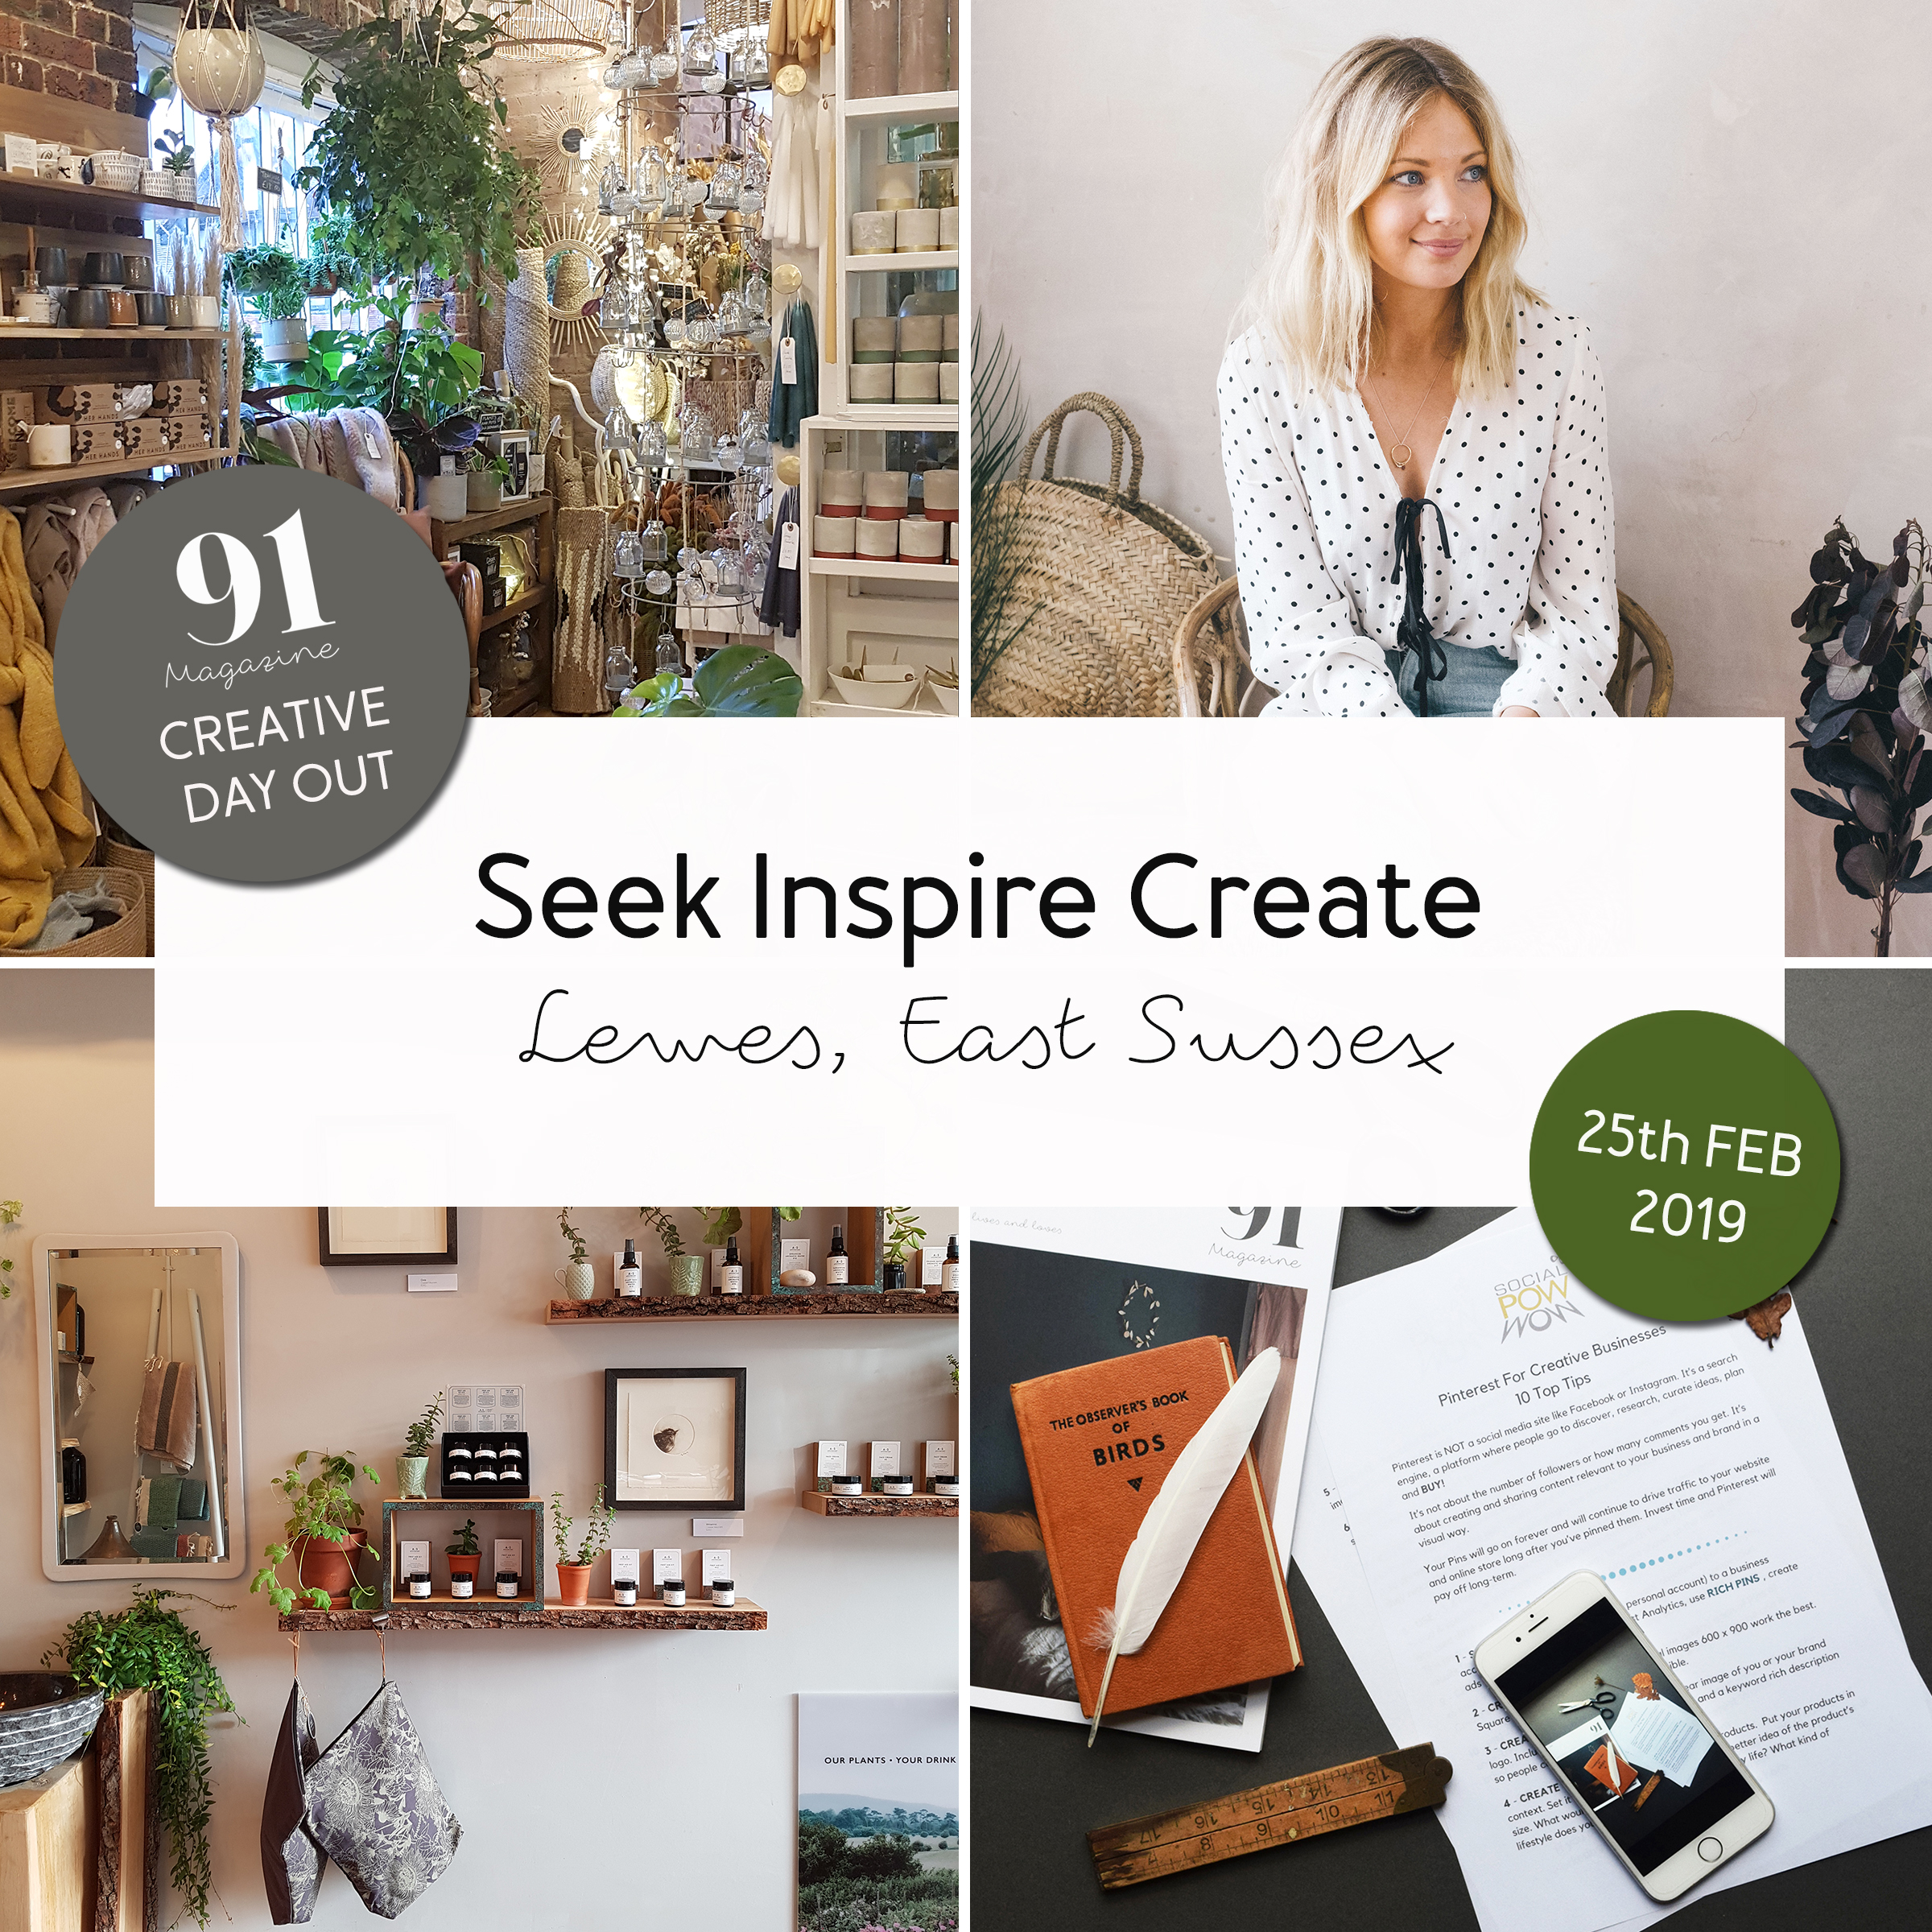 91 Magazine Seek Inspire Create day out in Lewes